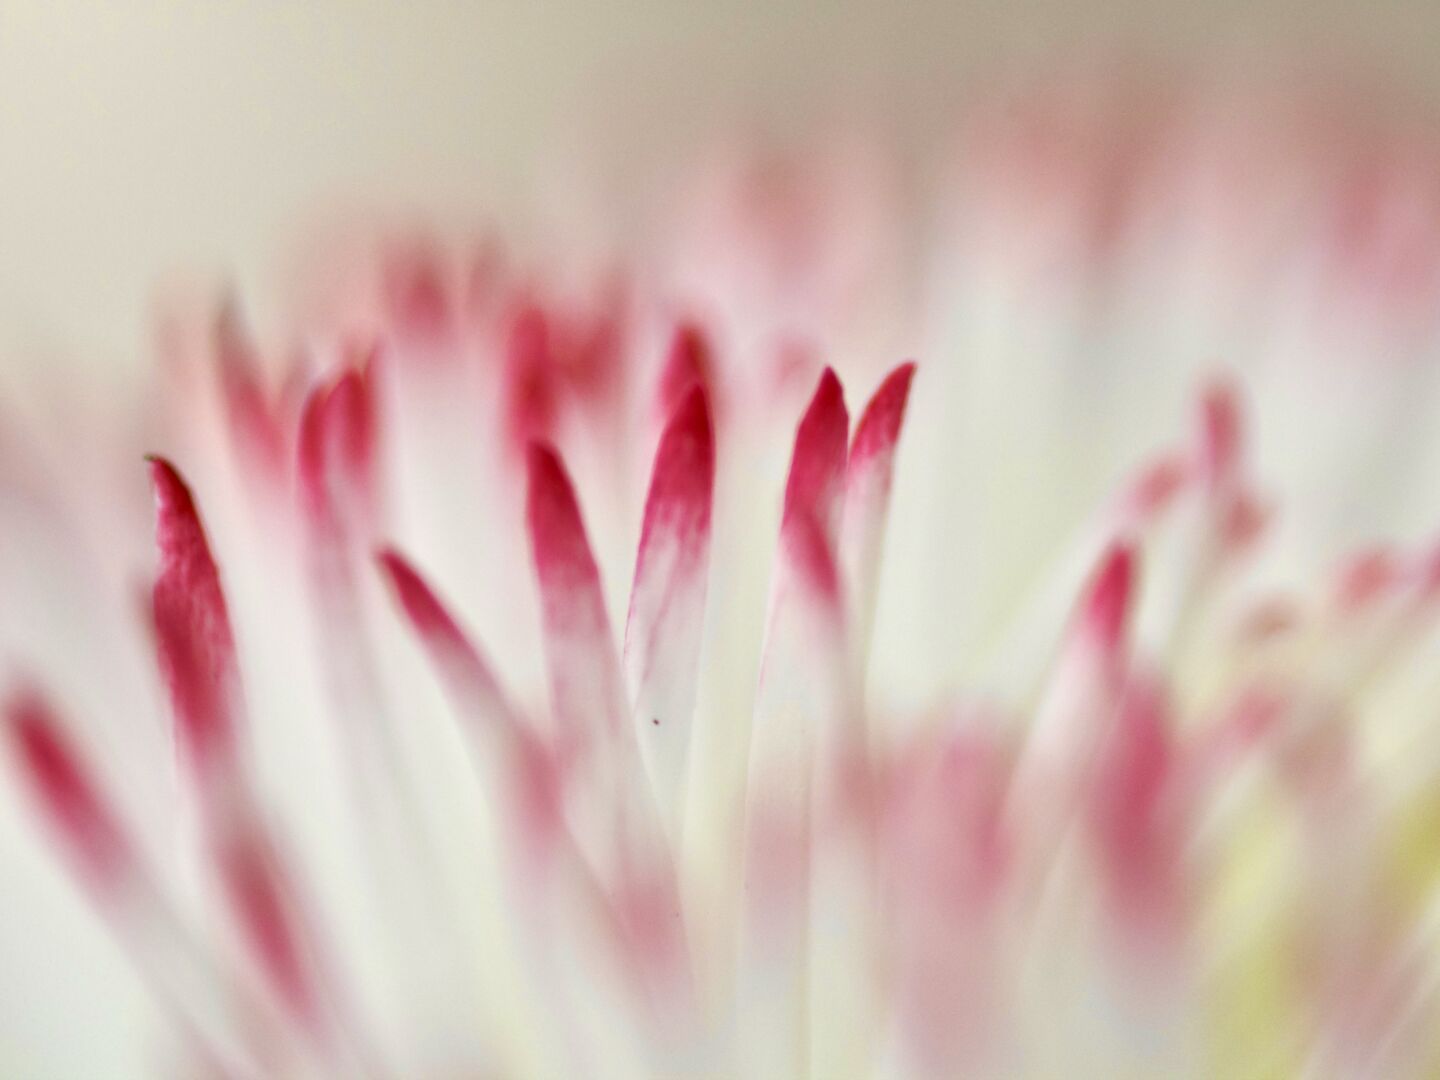 Discovering beauty in small things...

#flowers #flowerpower #macrophotography  #photography  #omsystem